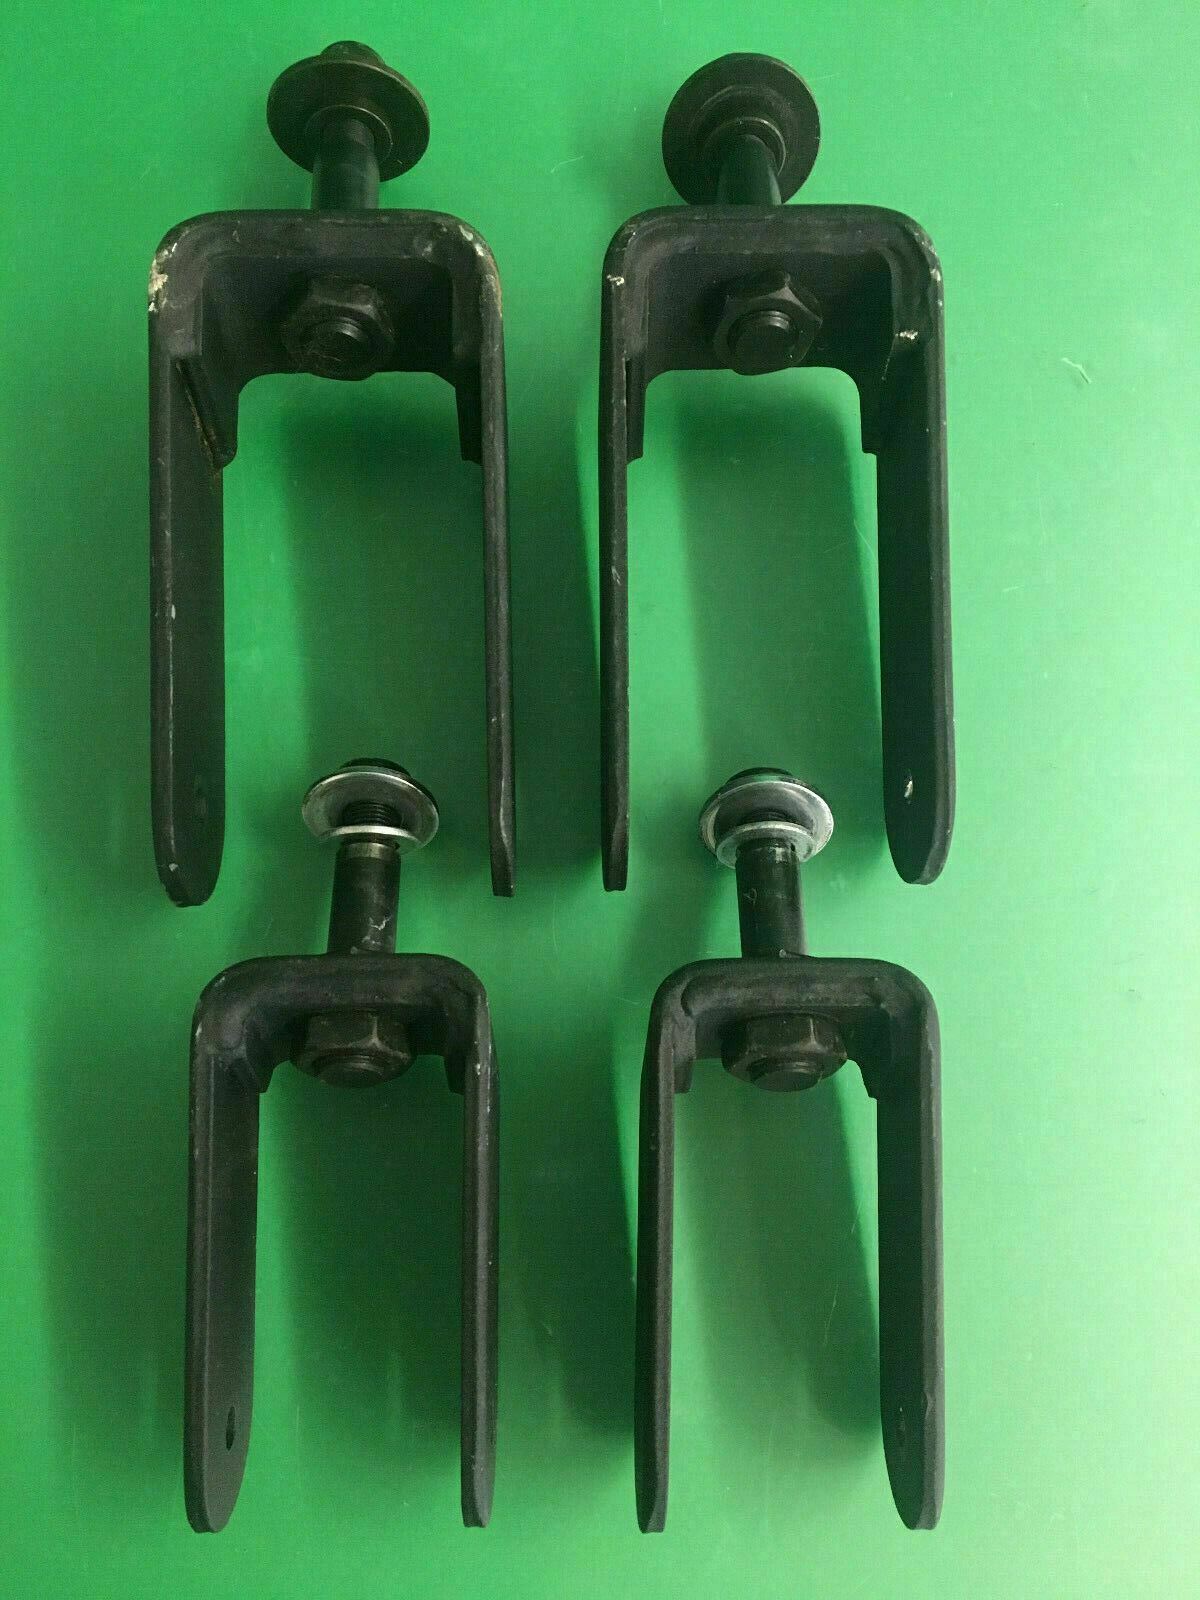 Front & Rear Caster Forks for Quantum 600 XL Power Wheelchair  -SET OF 4*  #D229